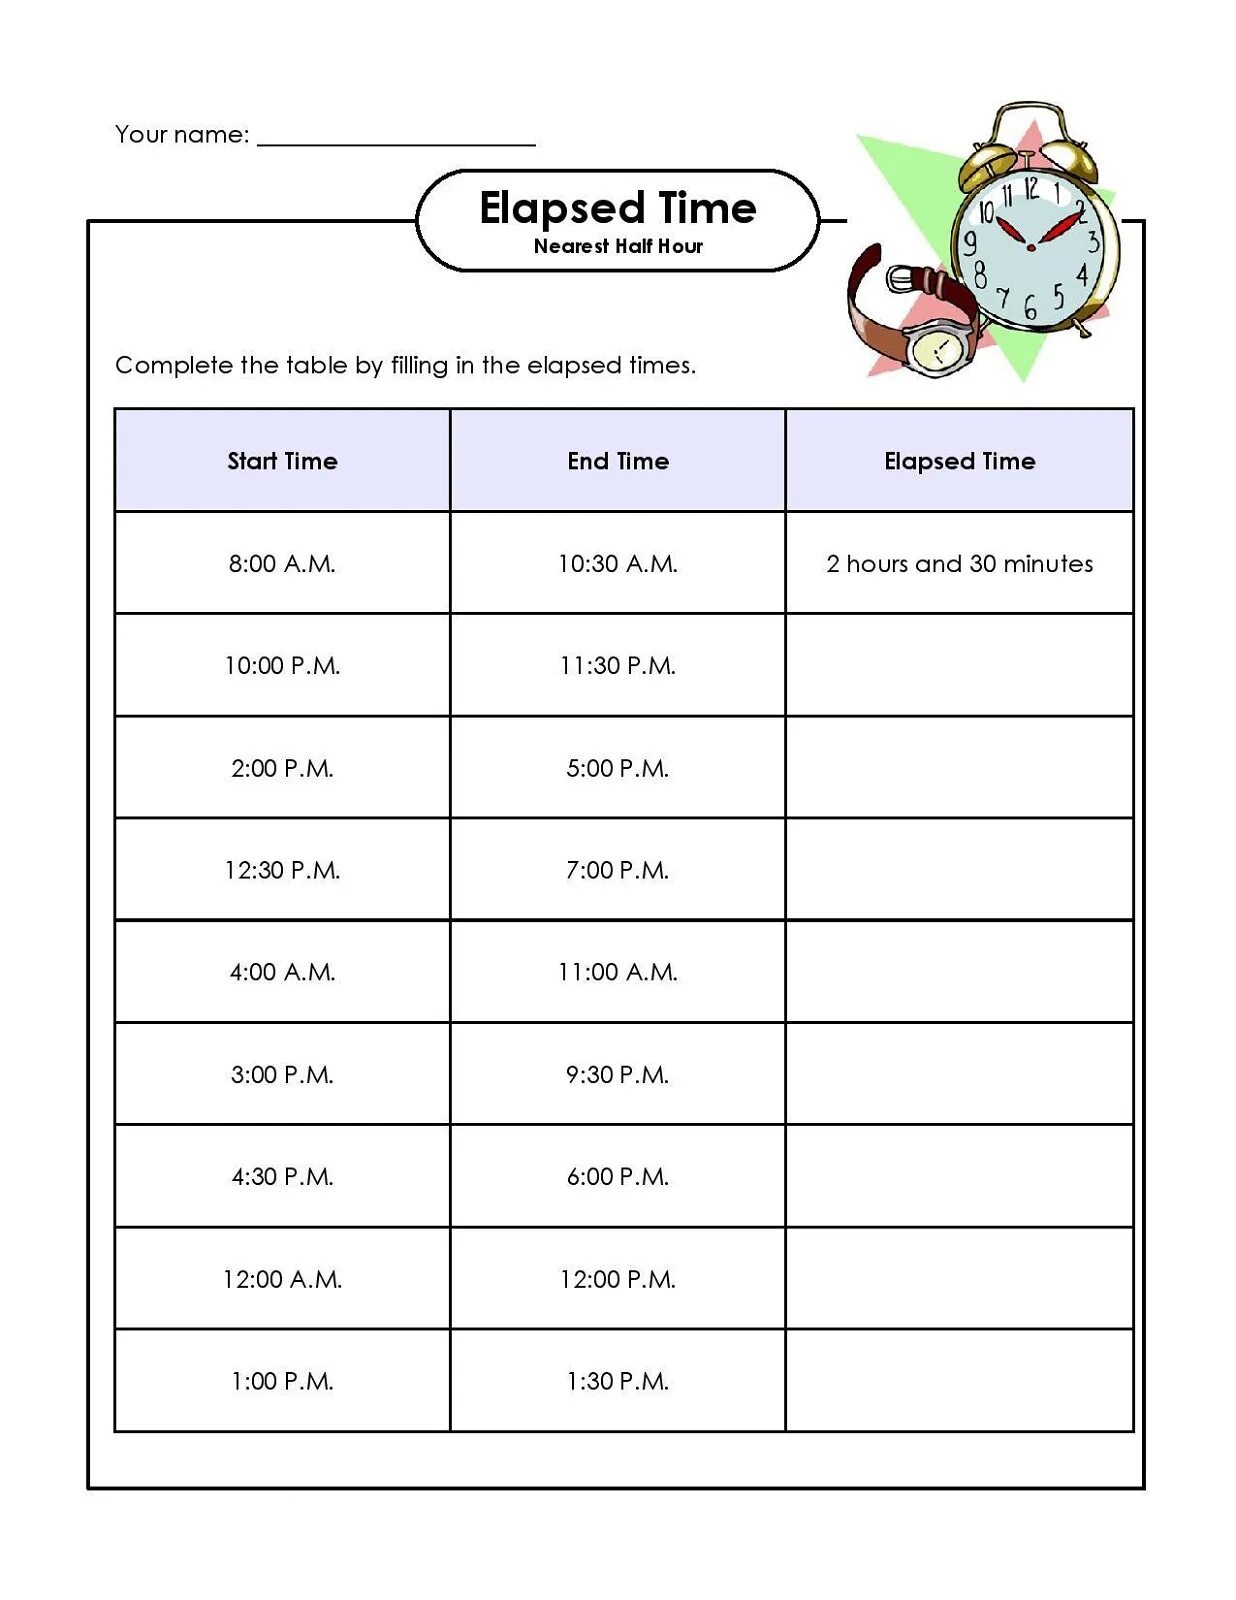 Time date numbers. Elapsed time. Elapsed time Worksheet. Time elapsed Worksheets for Kids. Elapsed time Worksheet for third Grade.